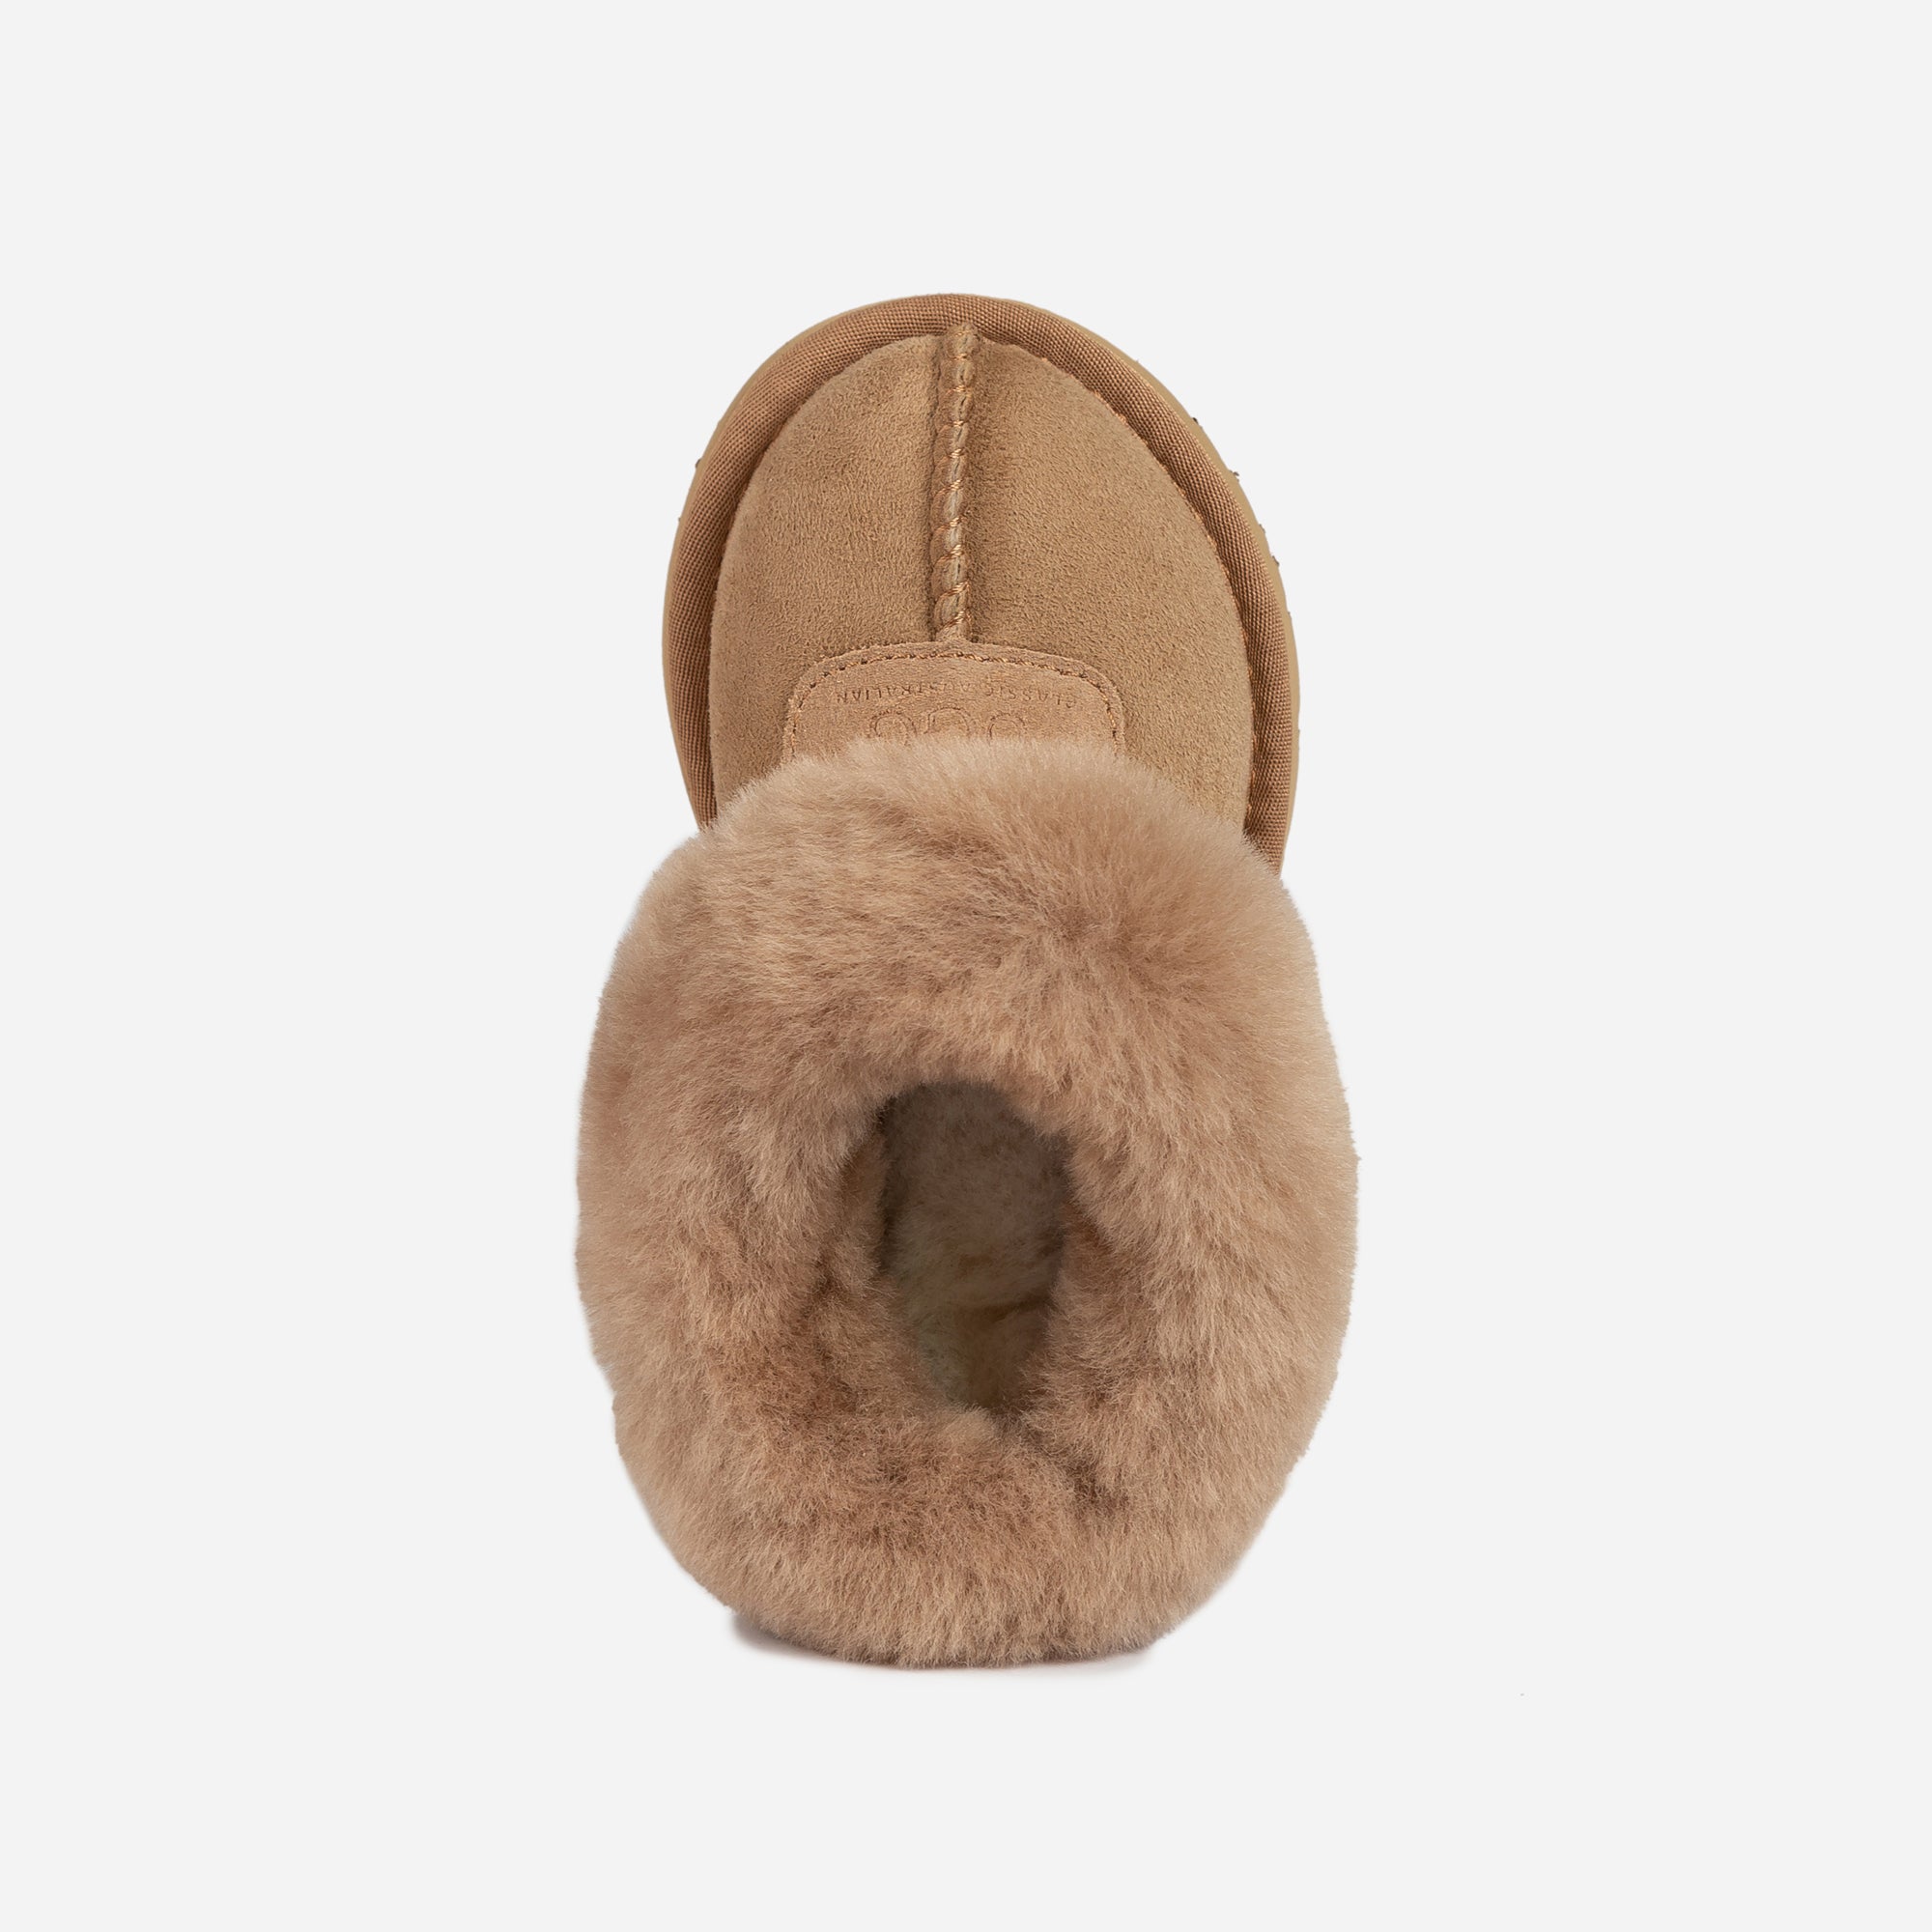 Ozwear Ugg Kids Daniela Ankle Boots-Kid Boots-PEROZ Accessories